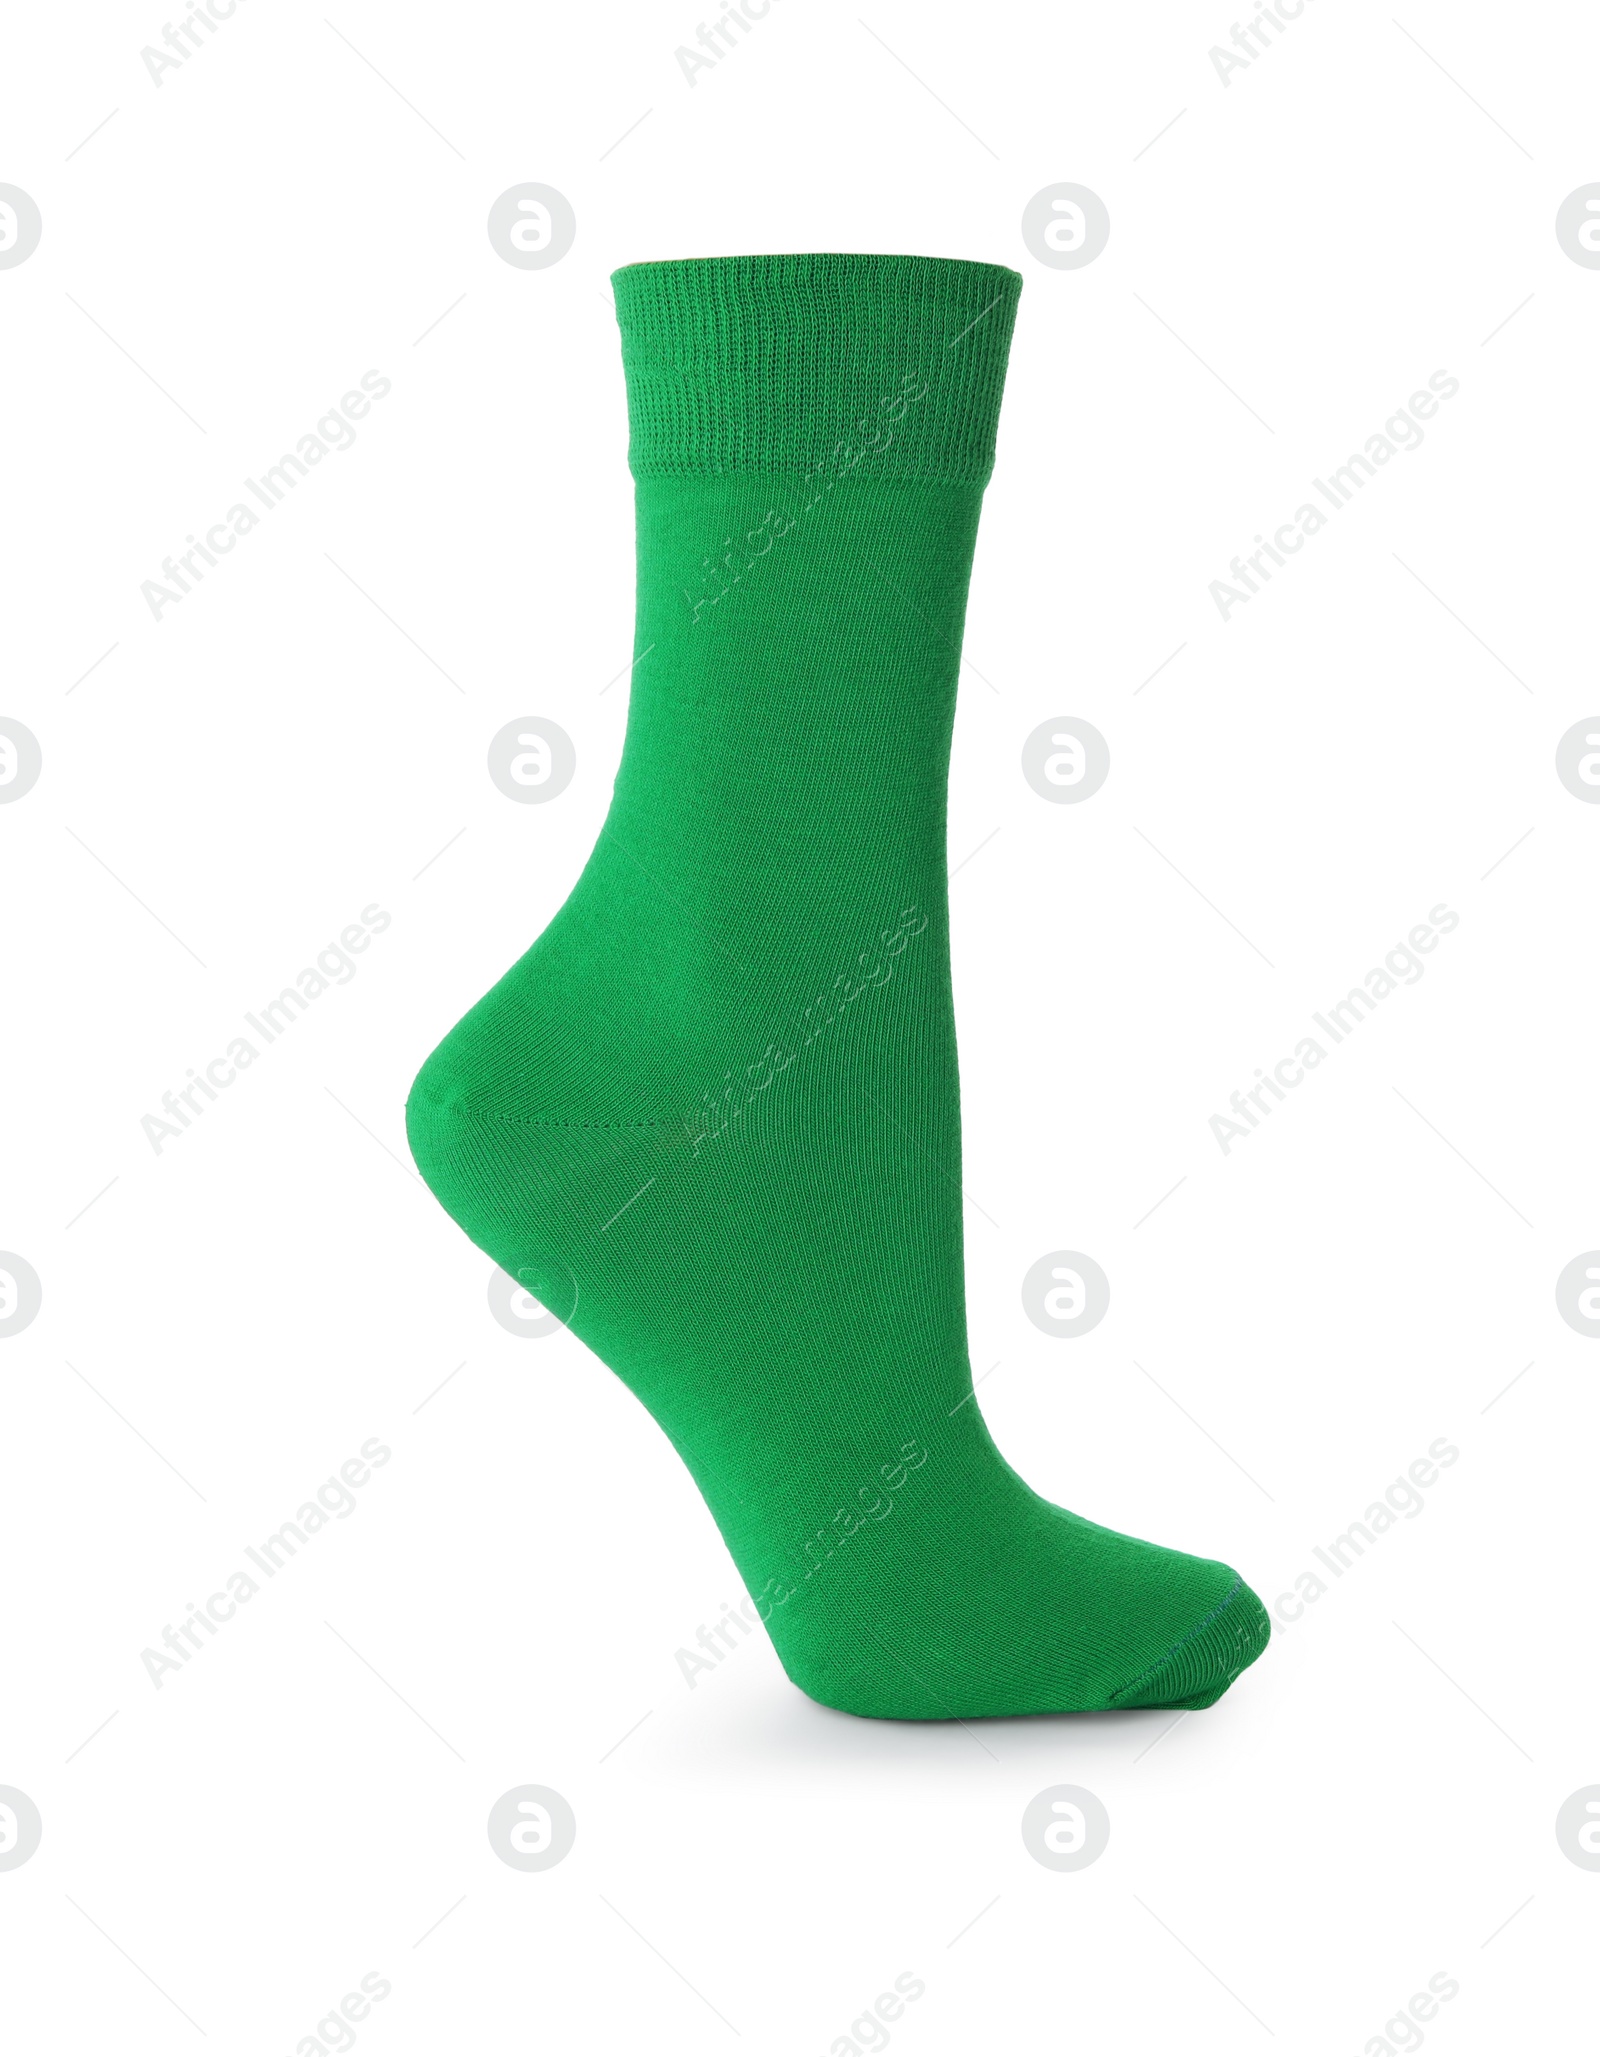 Photo of One new green sock isolated on white